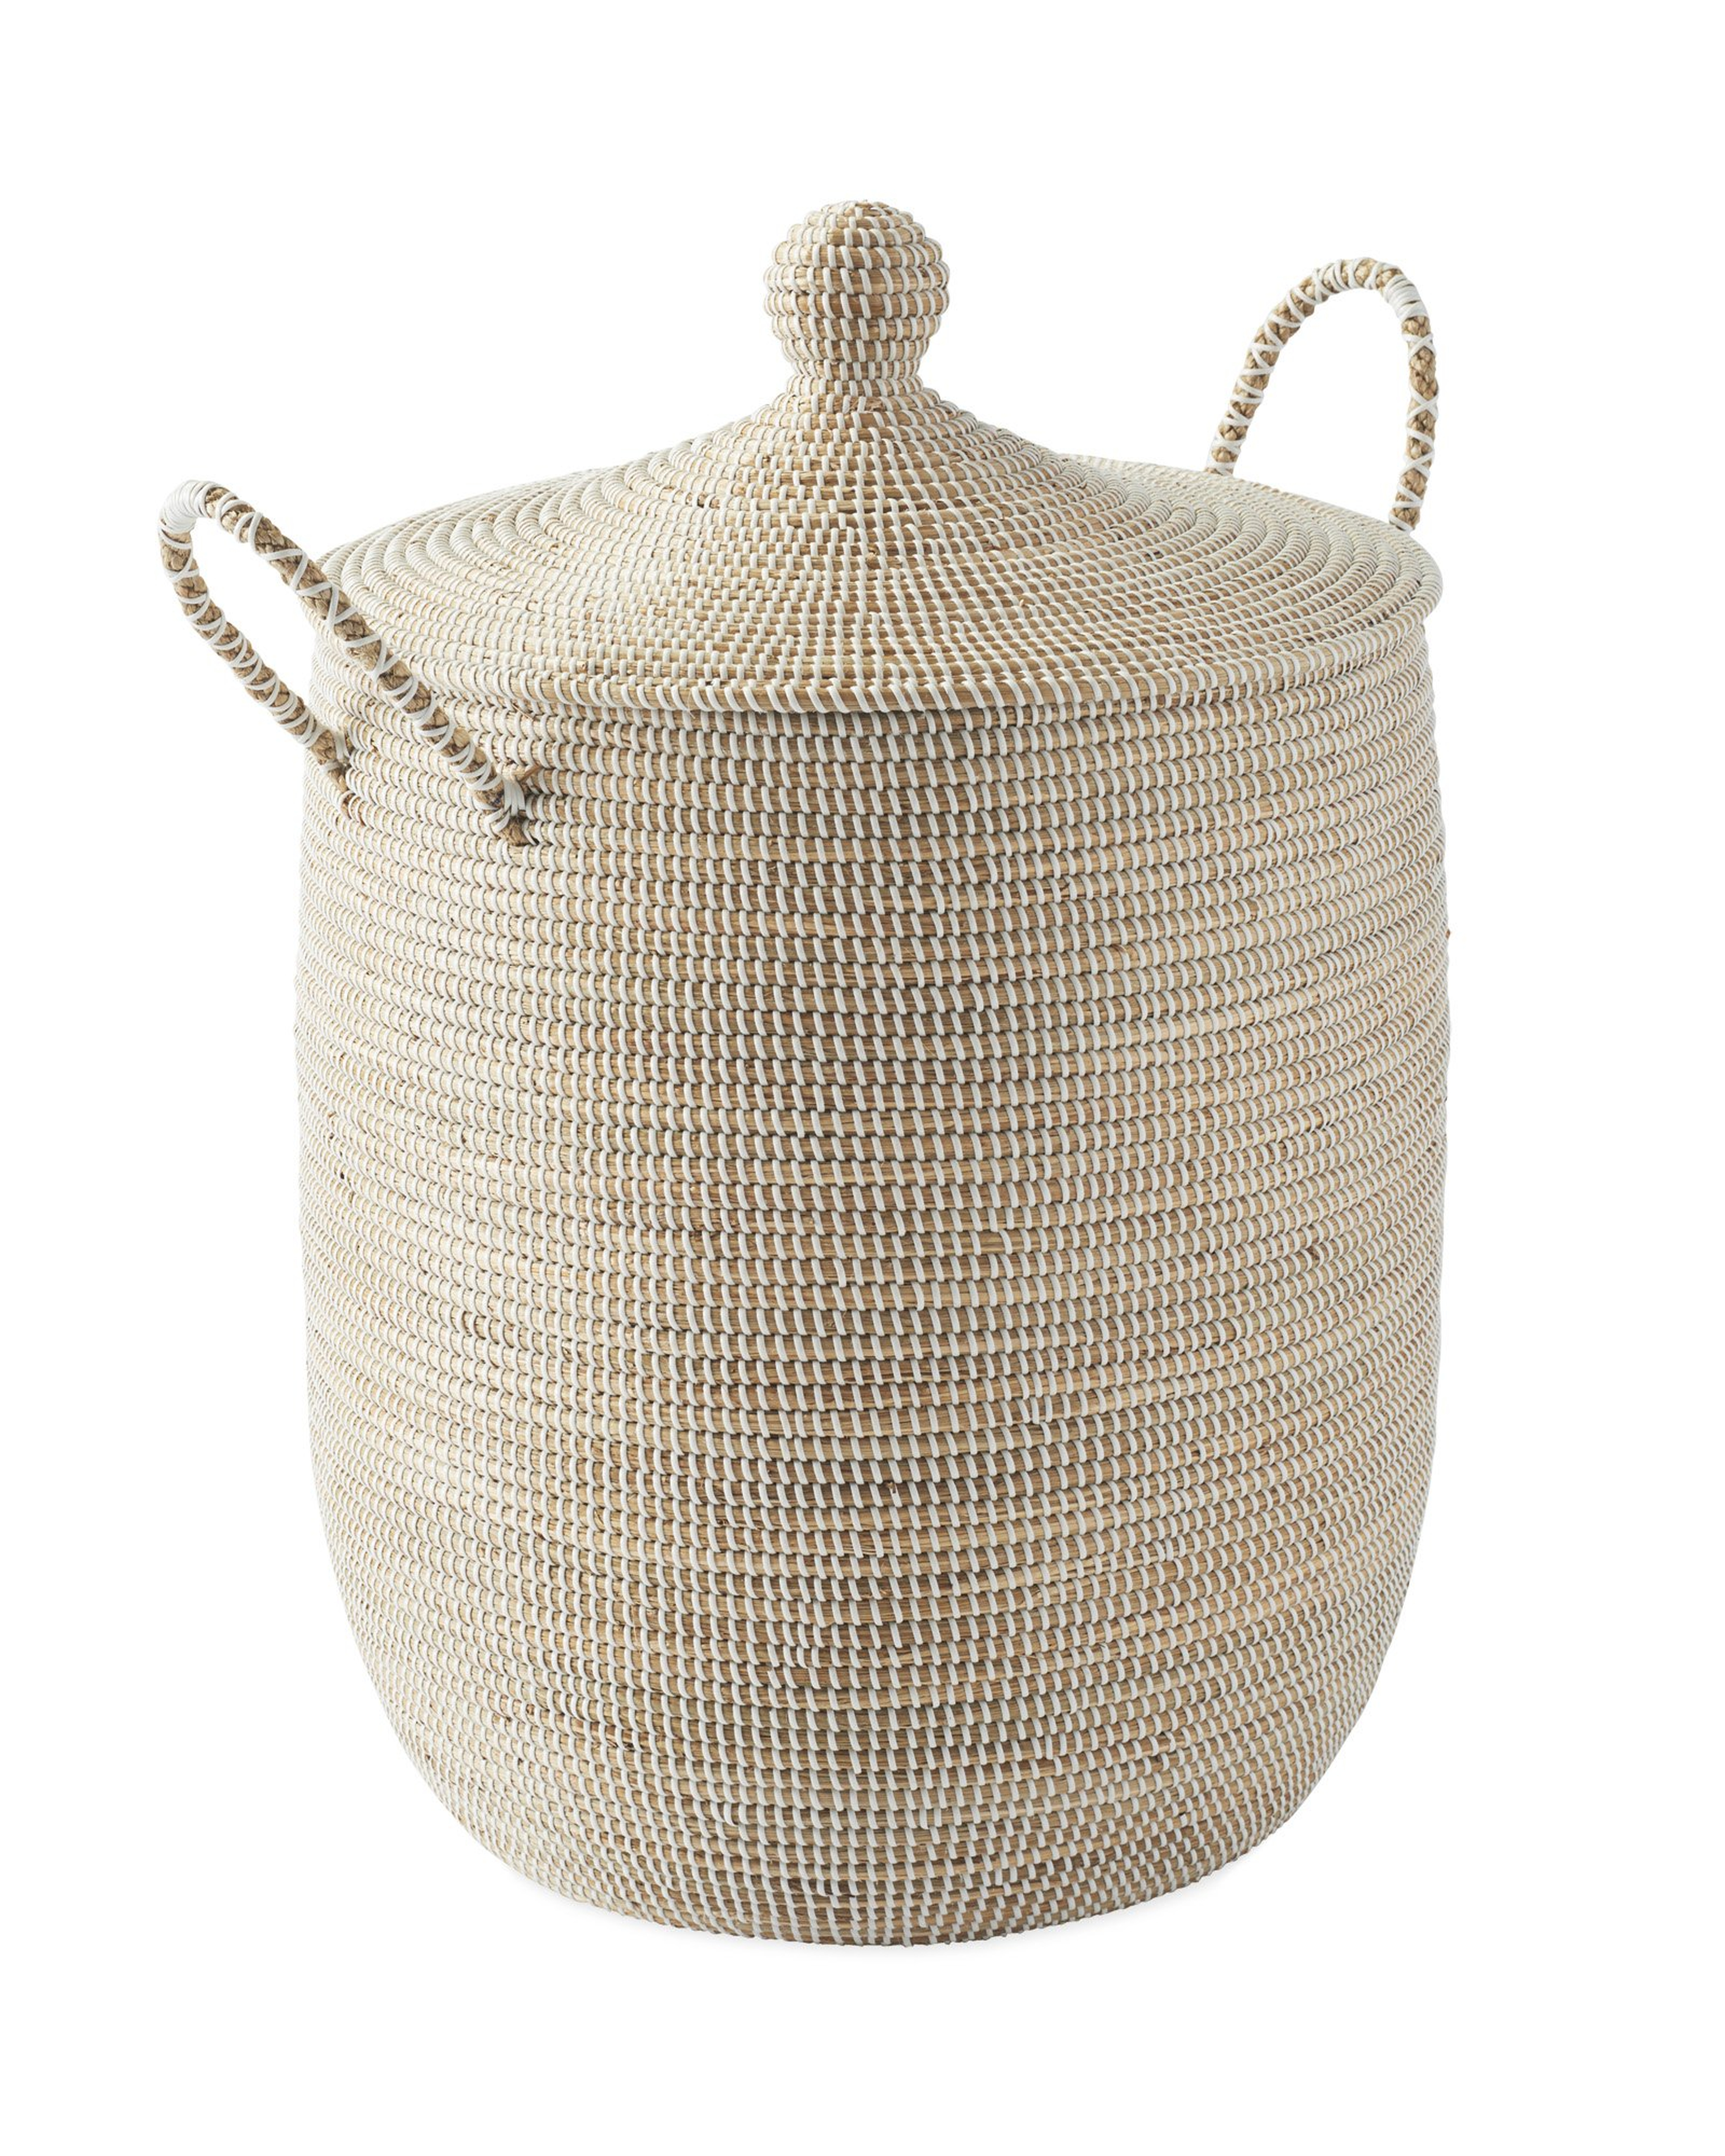 Solid La Jolla Large Basket - White - Serena and Lily